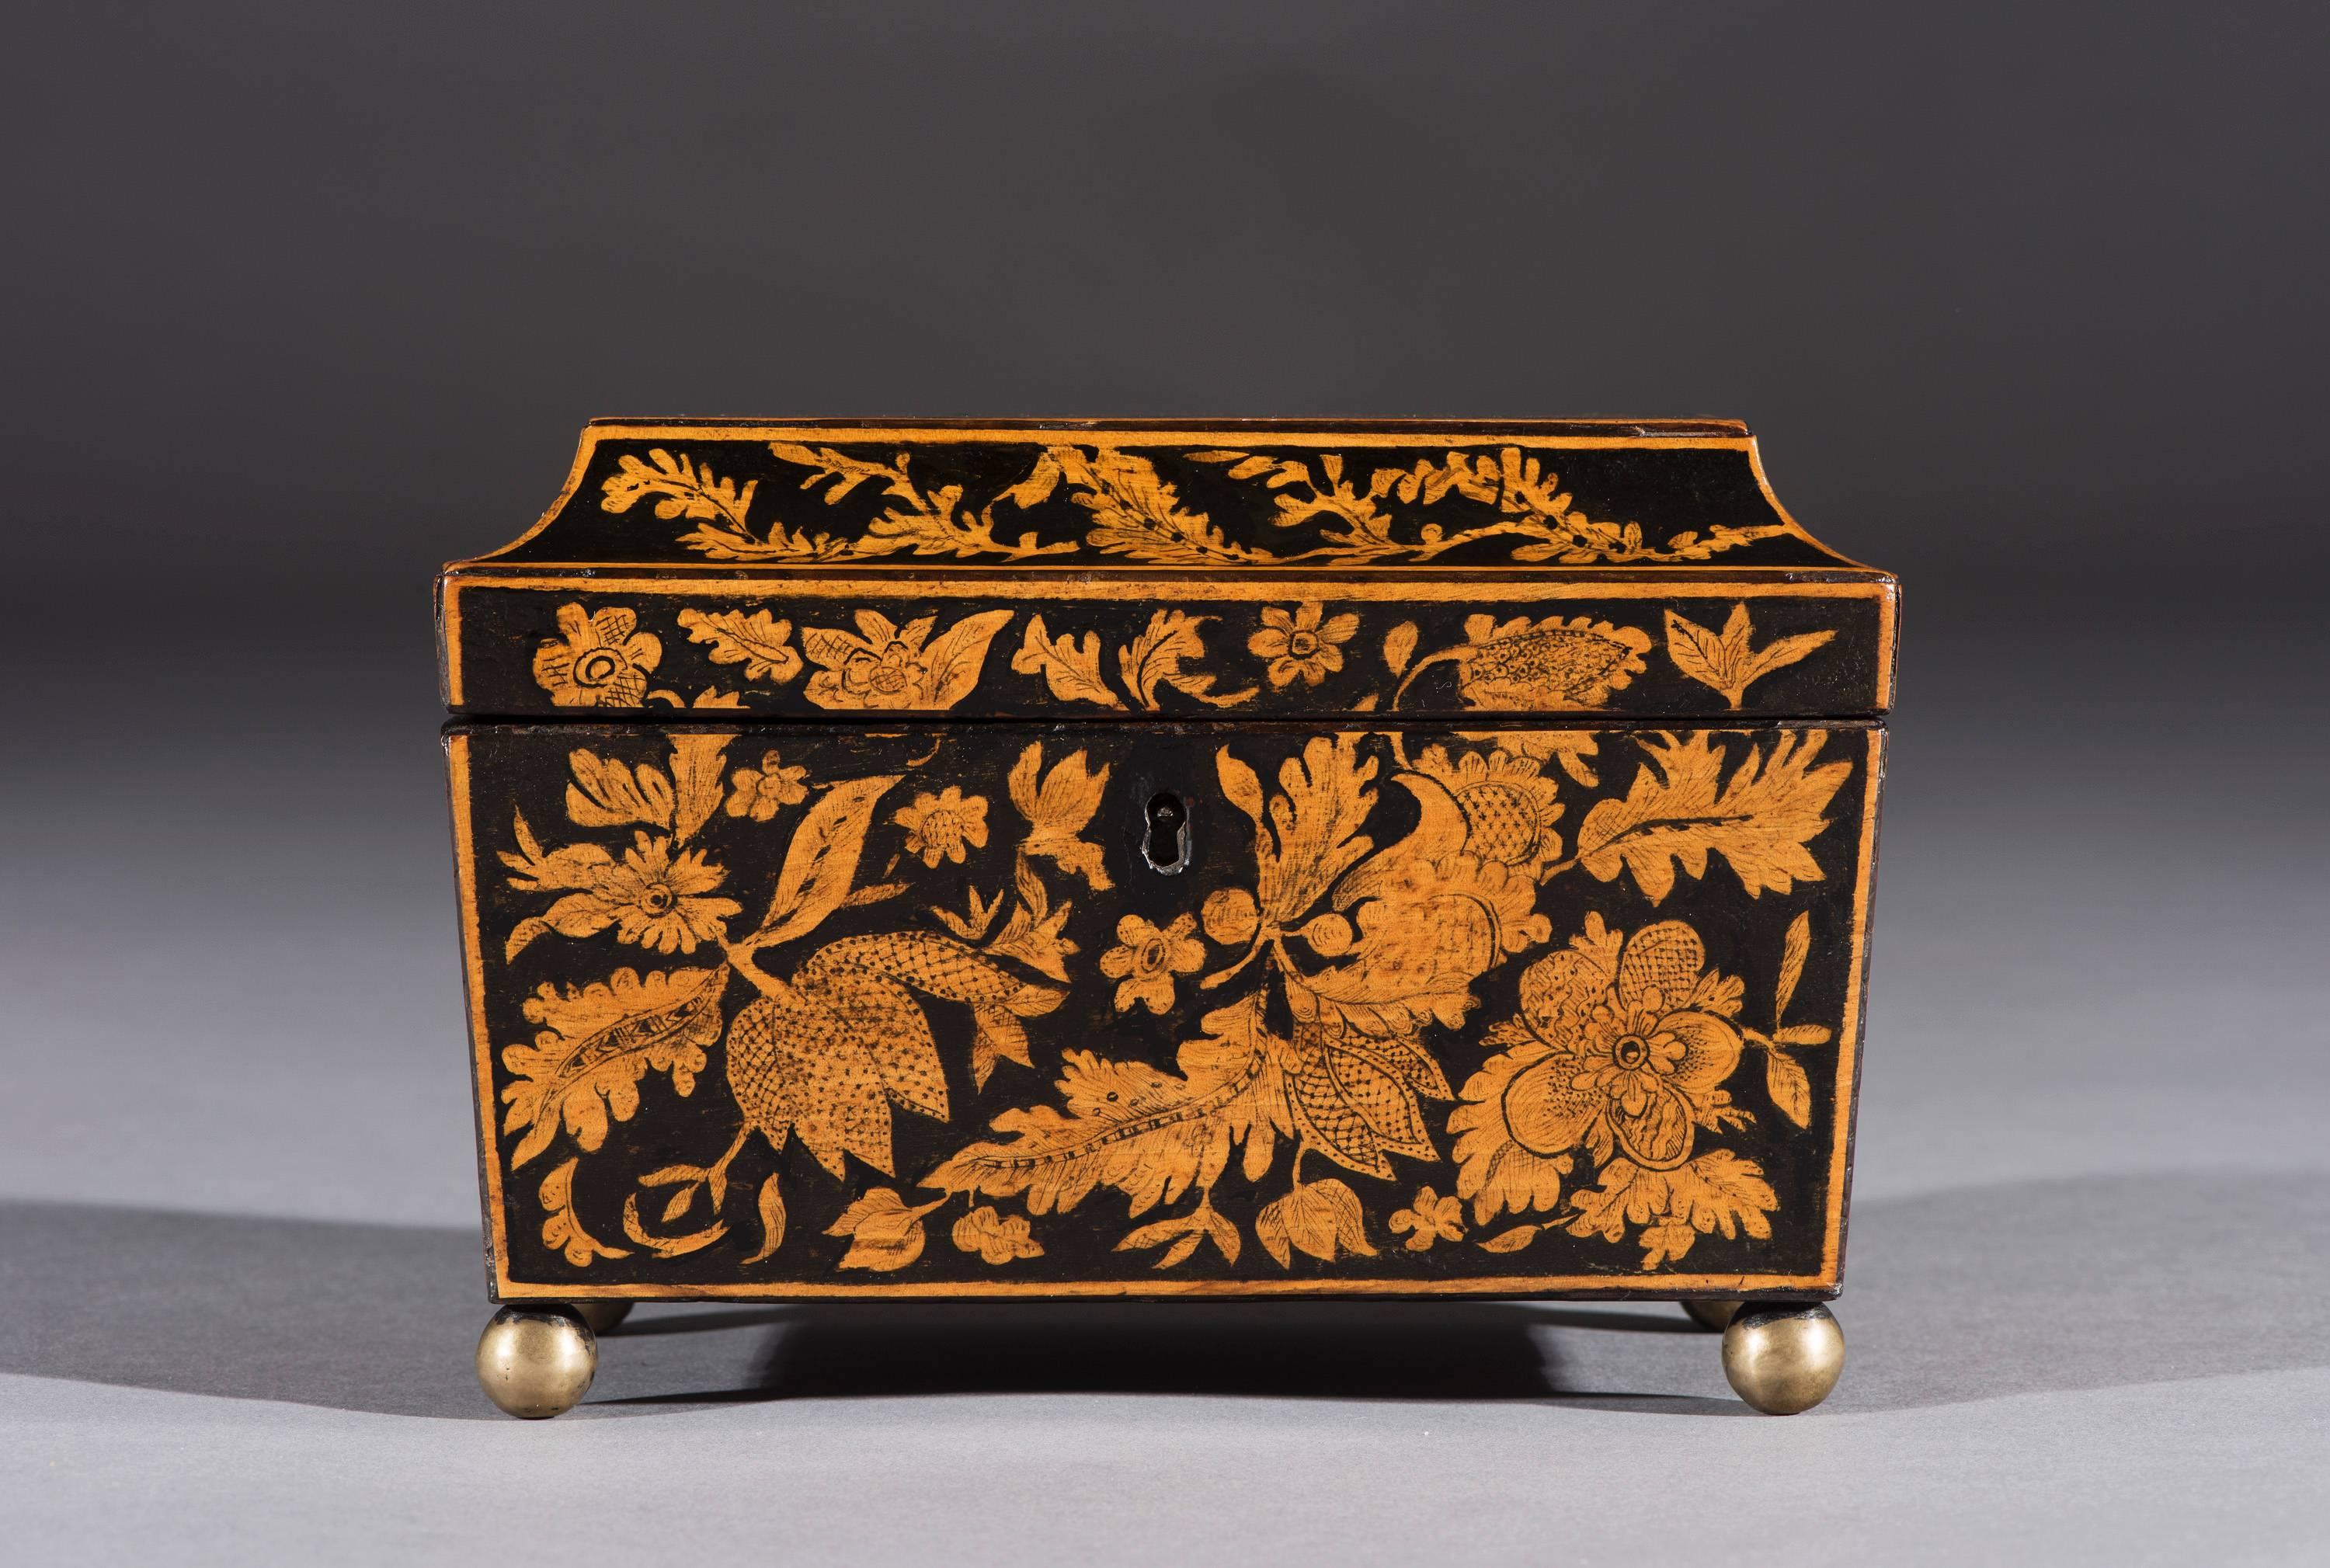 Early 19th century Regency penwork tea caddy of rare small size.